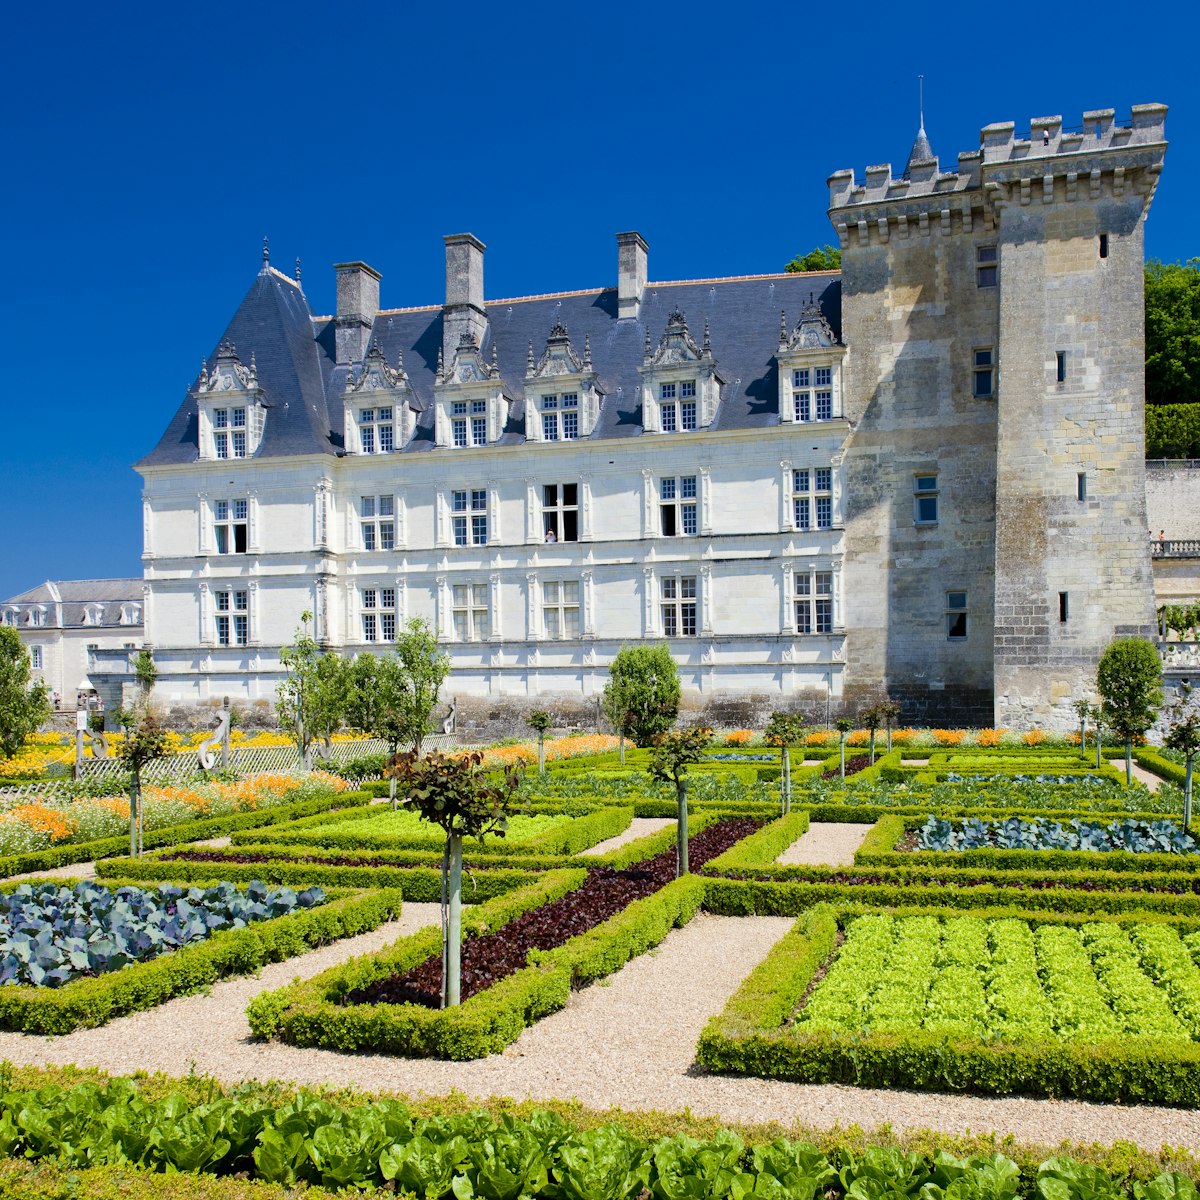 Exterior of Villandry Castle with its manicured garden.